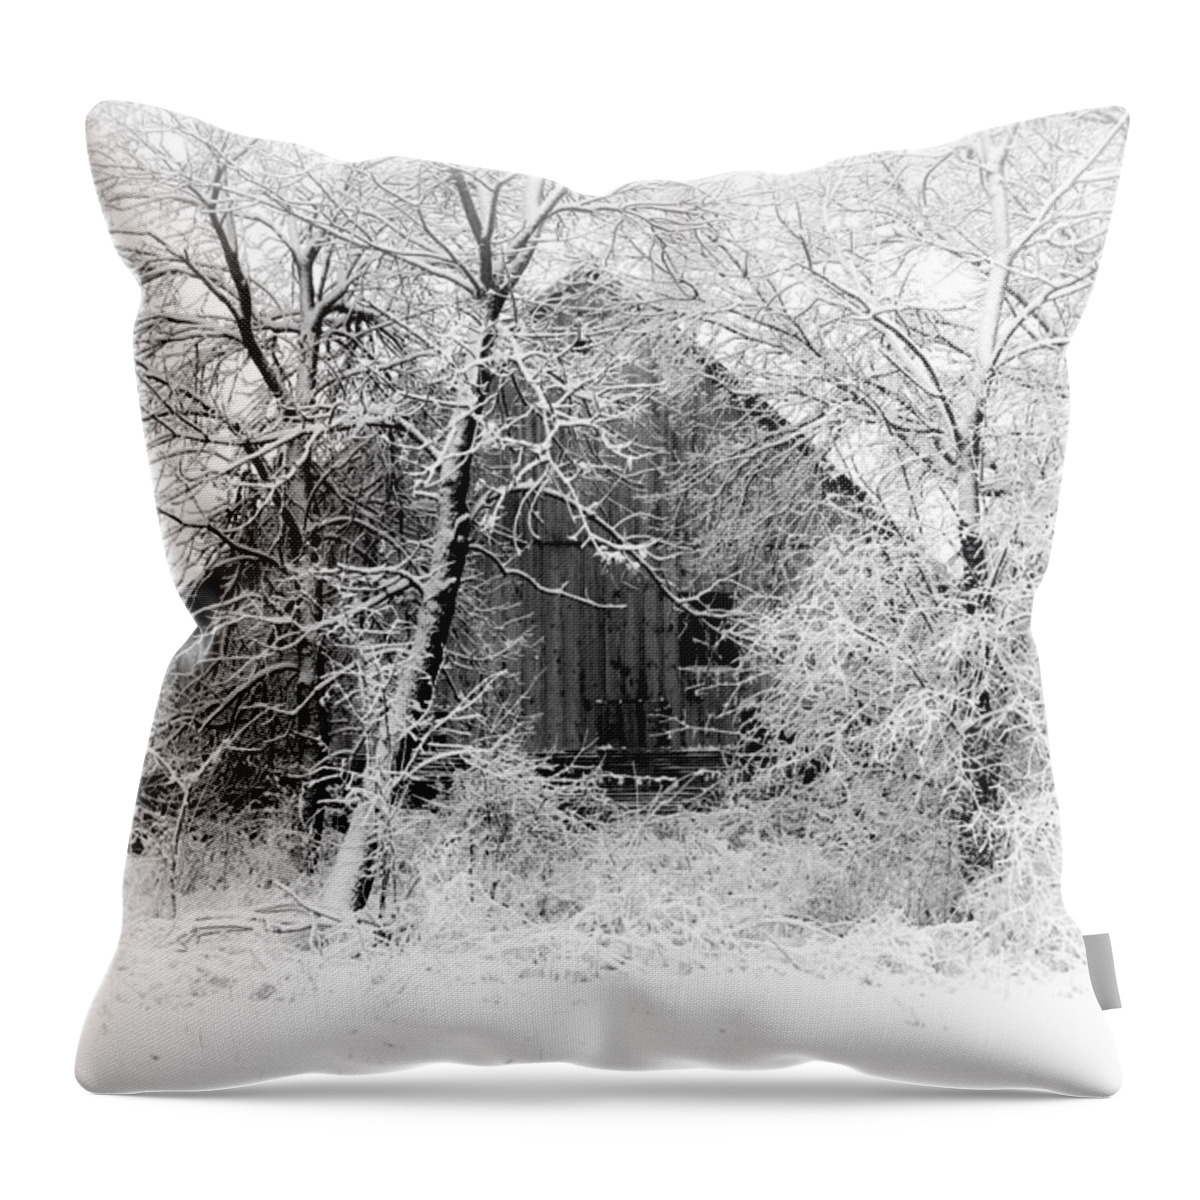 Barn Throw Pillow featuring the photograph White Christmas 1 by Julie Hamilton